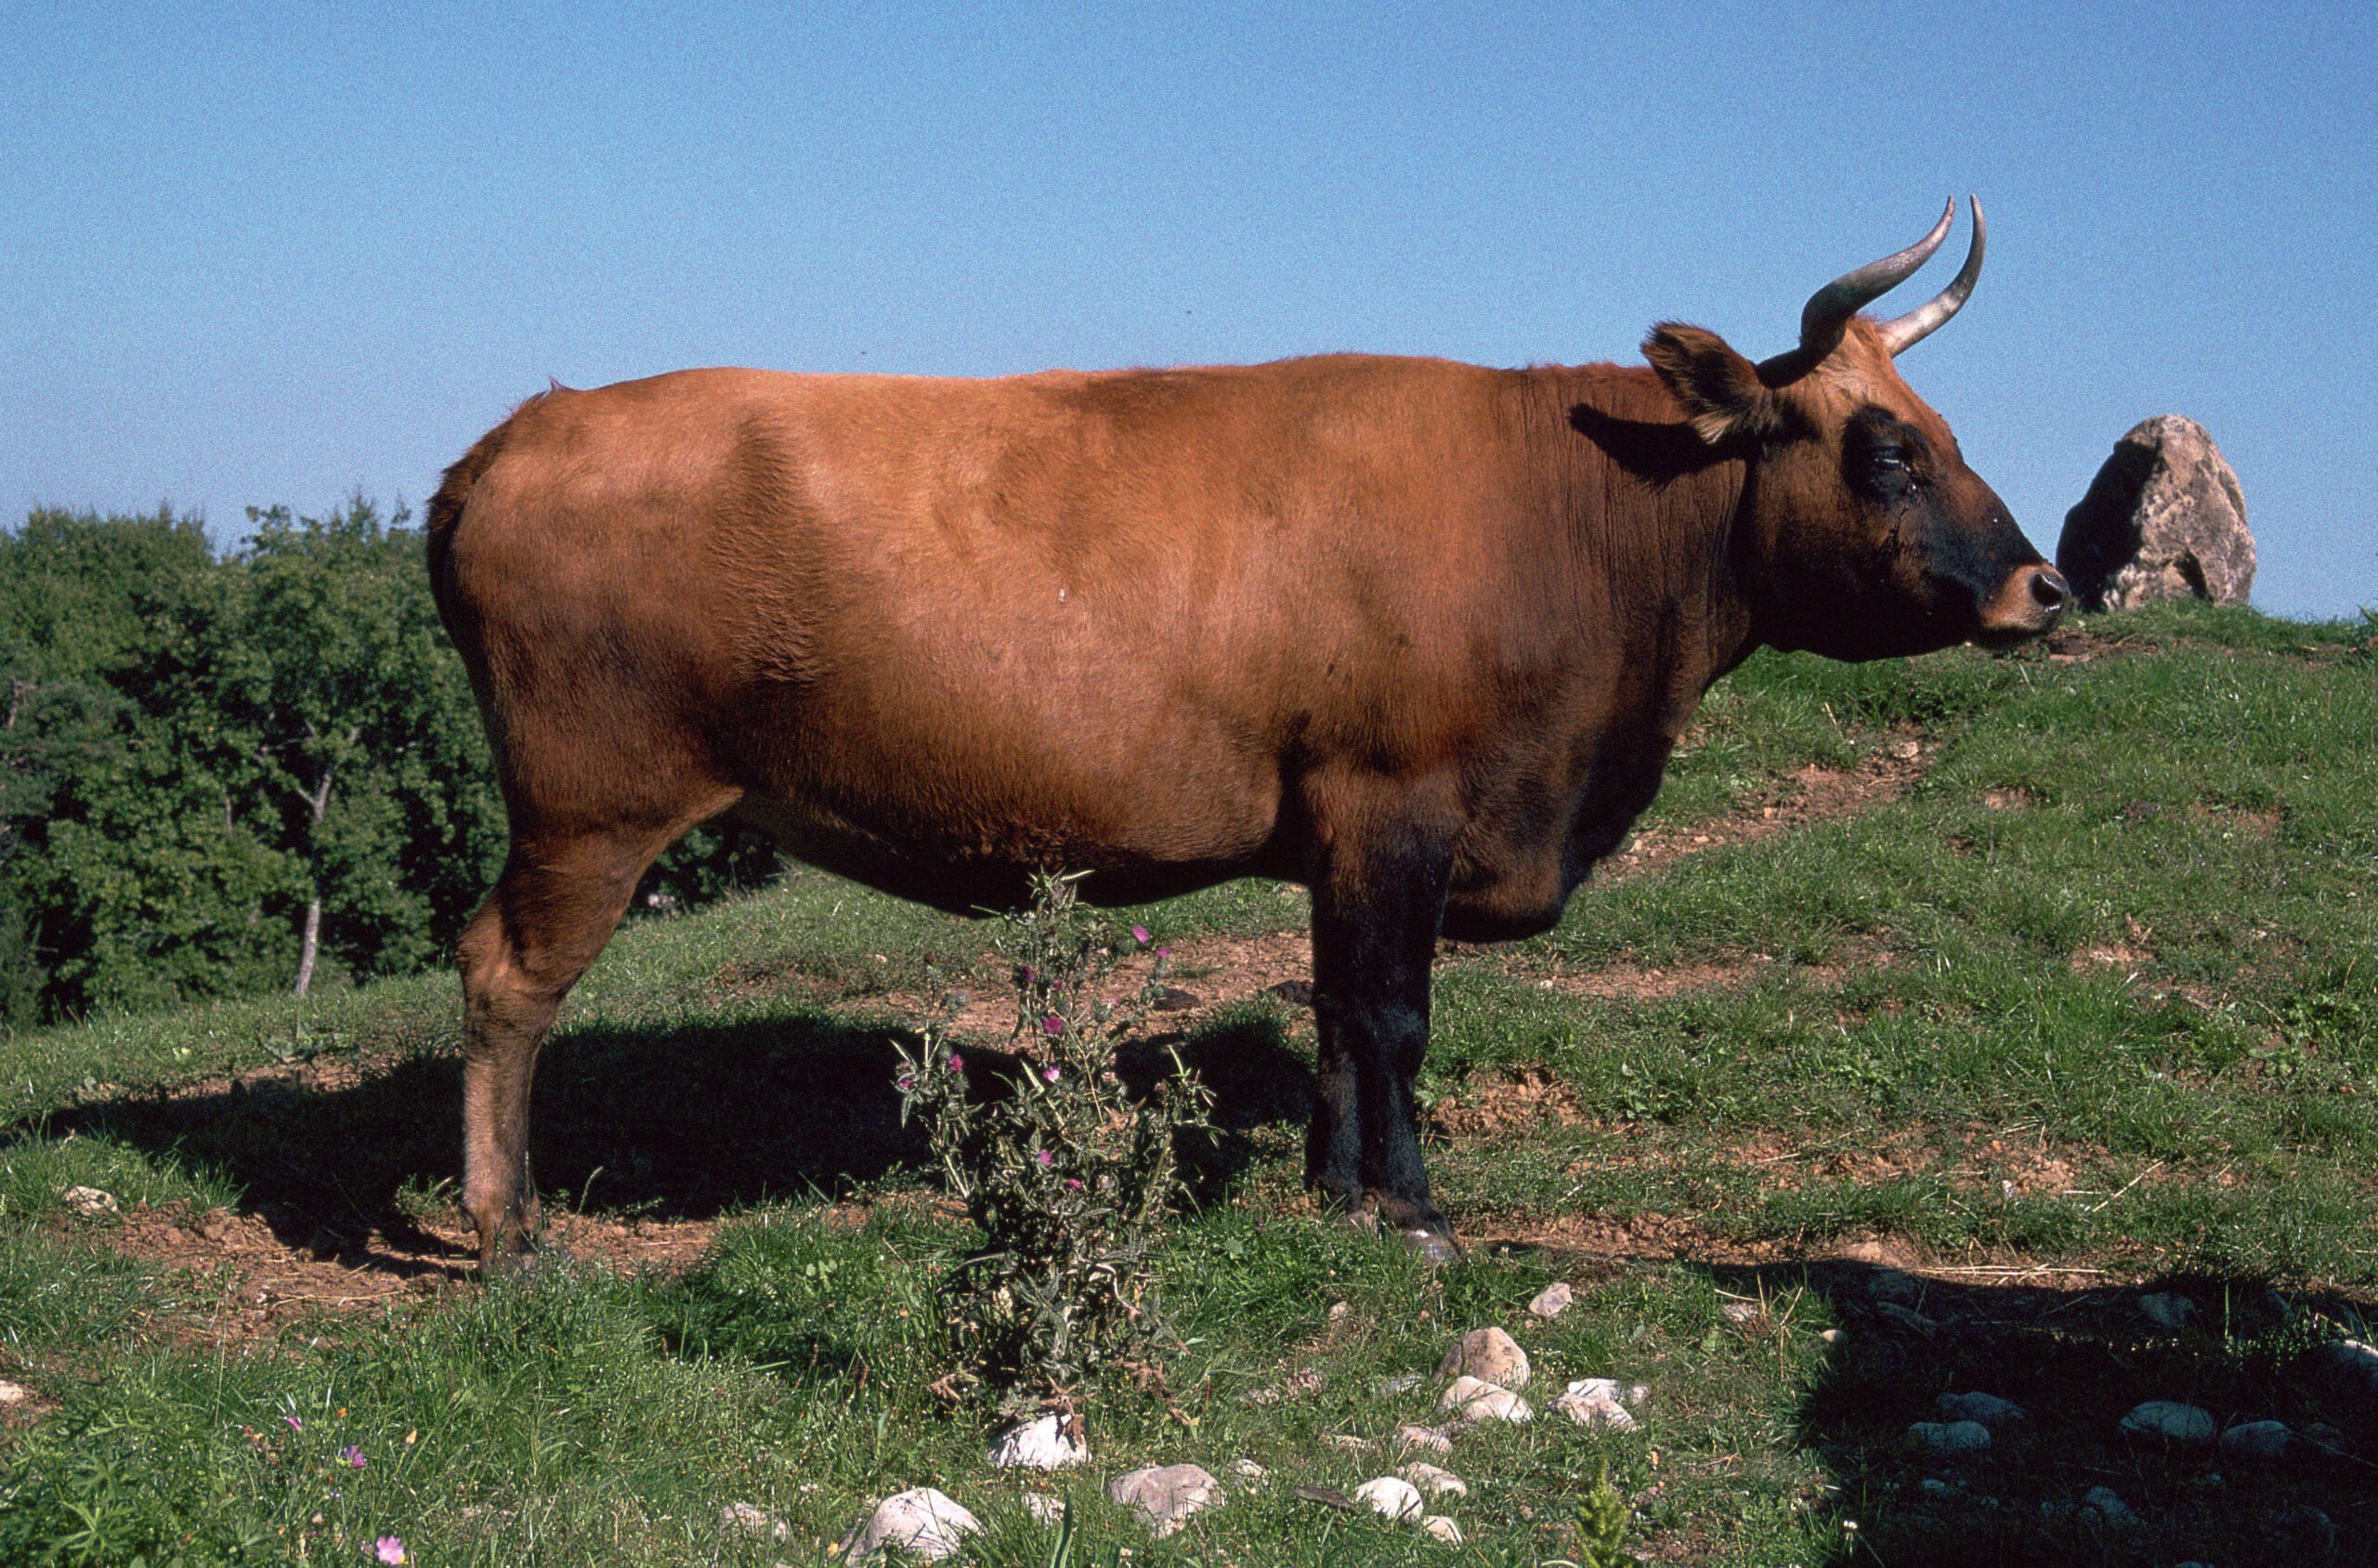 Auroch, a primitive breed of cattle re-introduced today by selective breeding